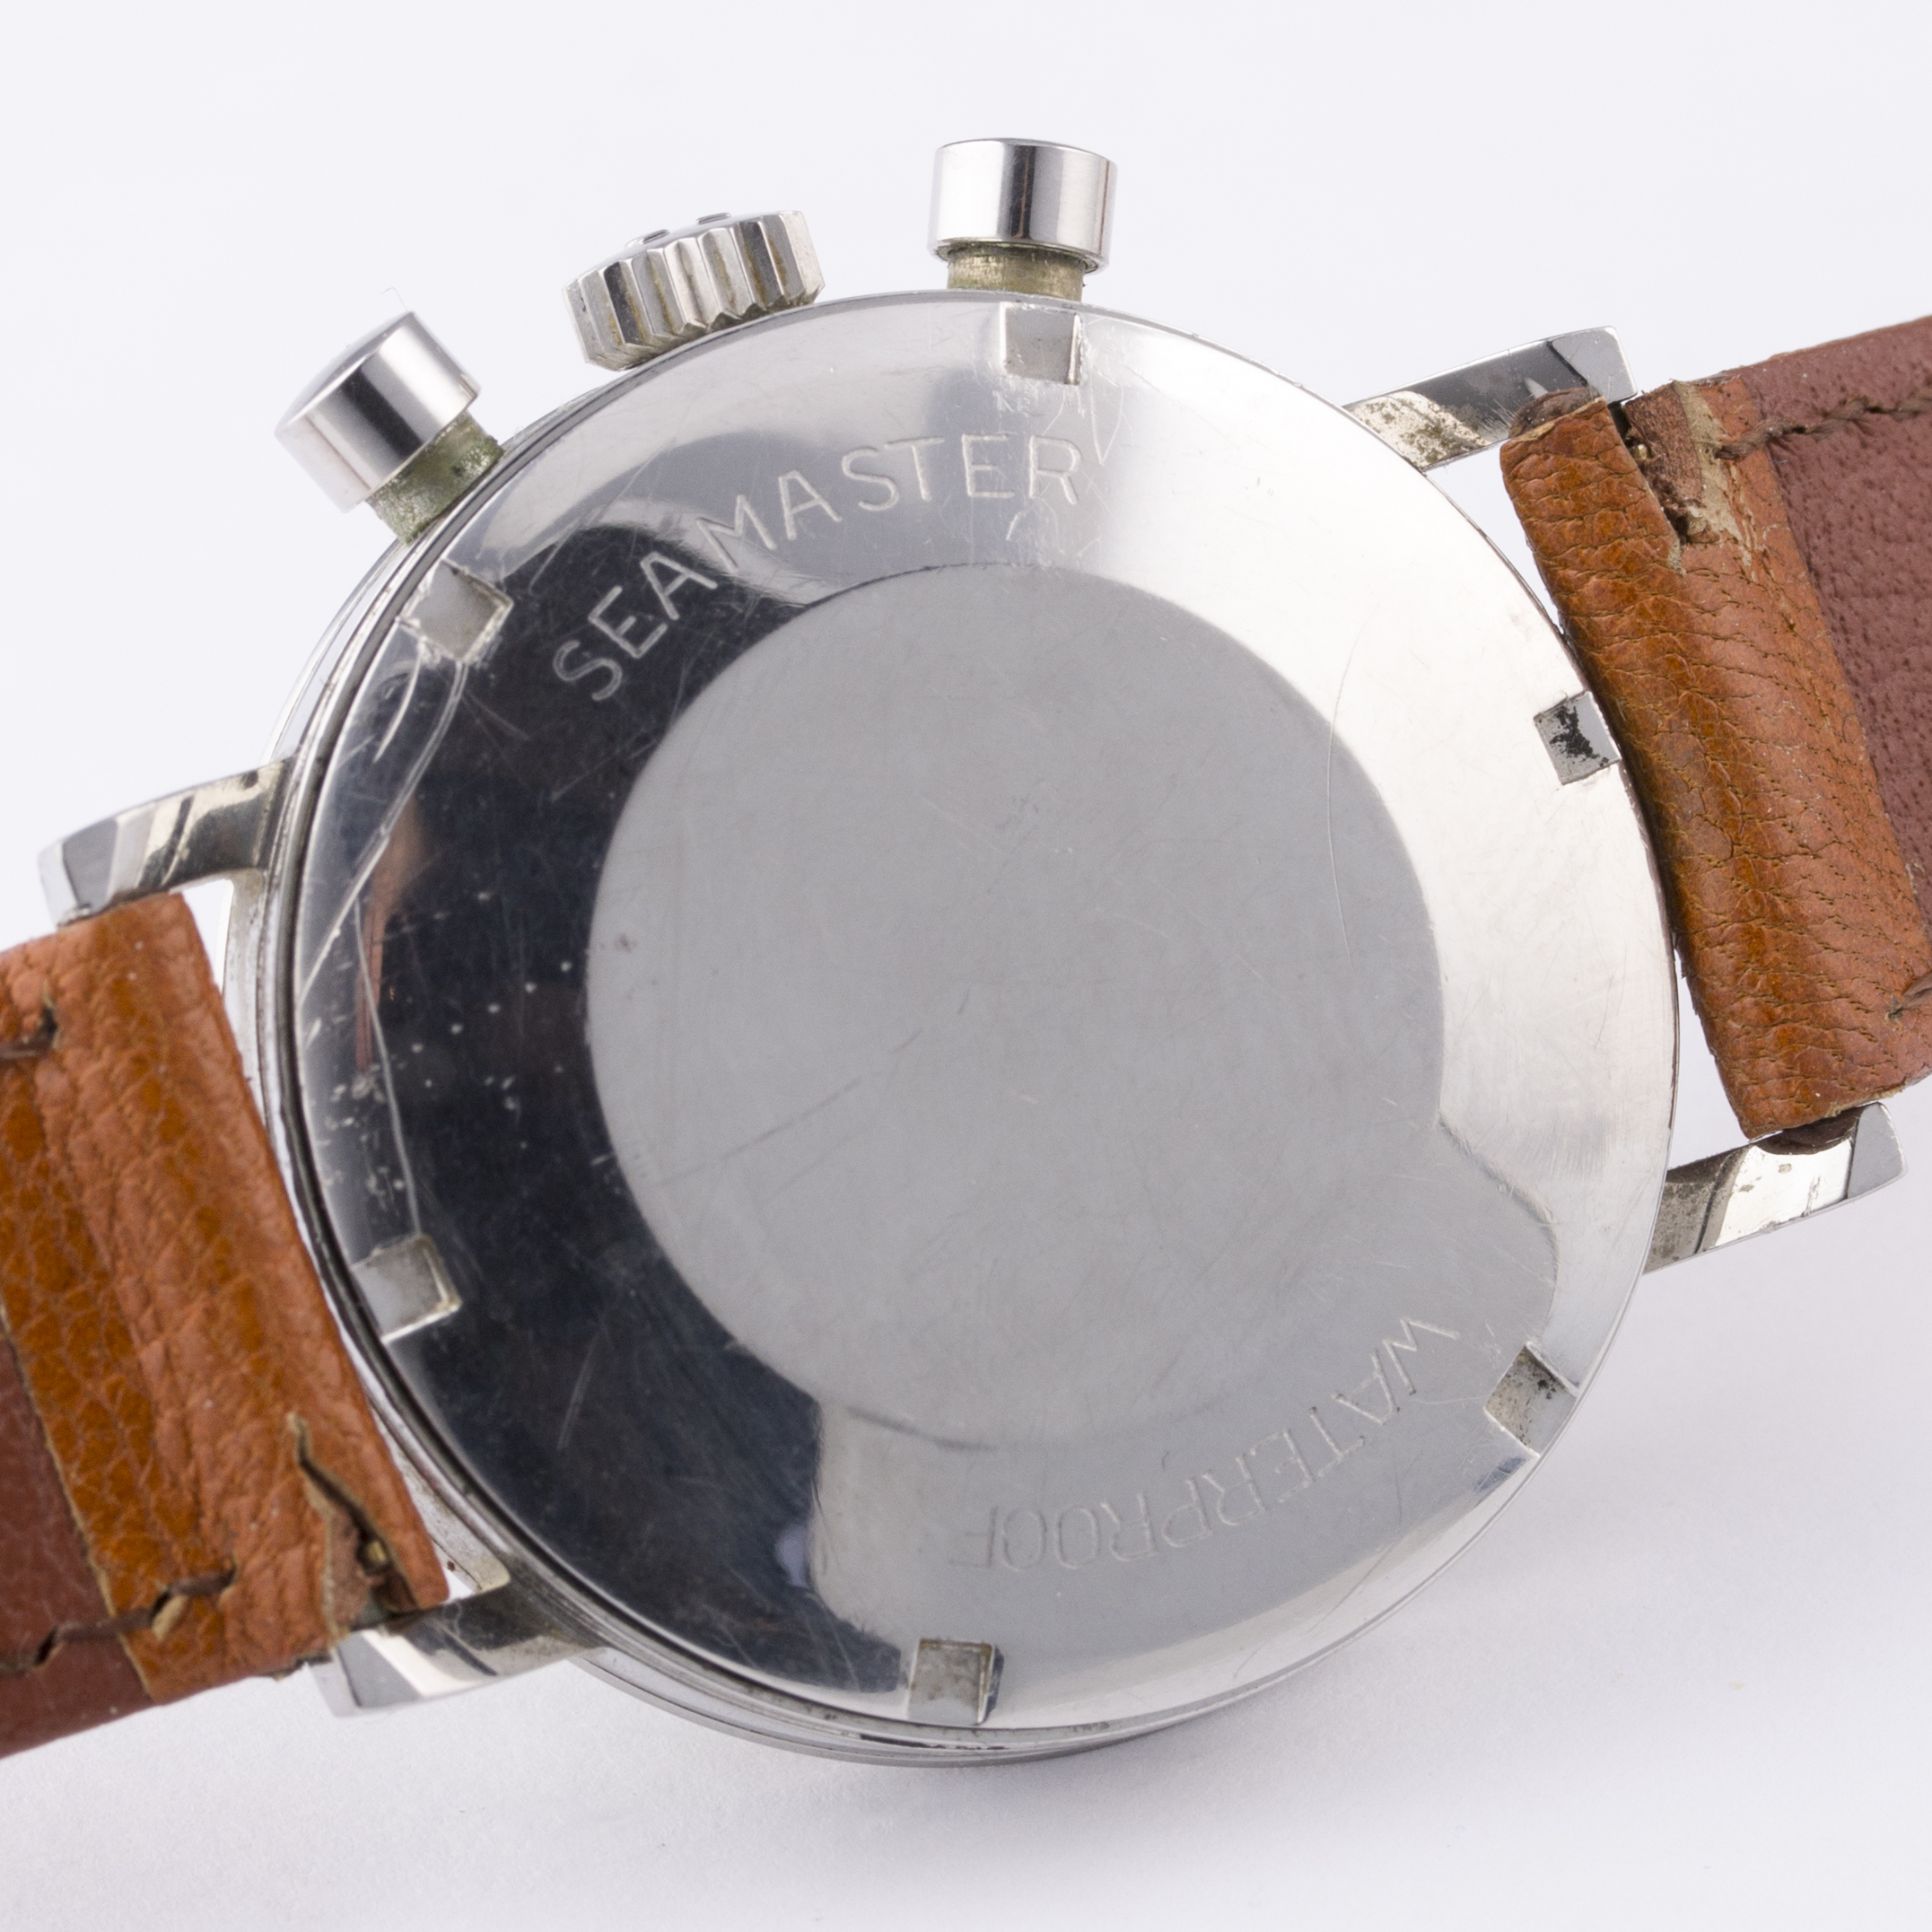 A GENTLEMAN`S STAINLESS OMEGA SEAMASTER CHRONOGRAPH WRIST WATCH CIRCA 1967, REF. 145.005-67 D: - Image 6 of 8